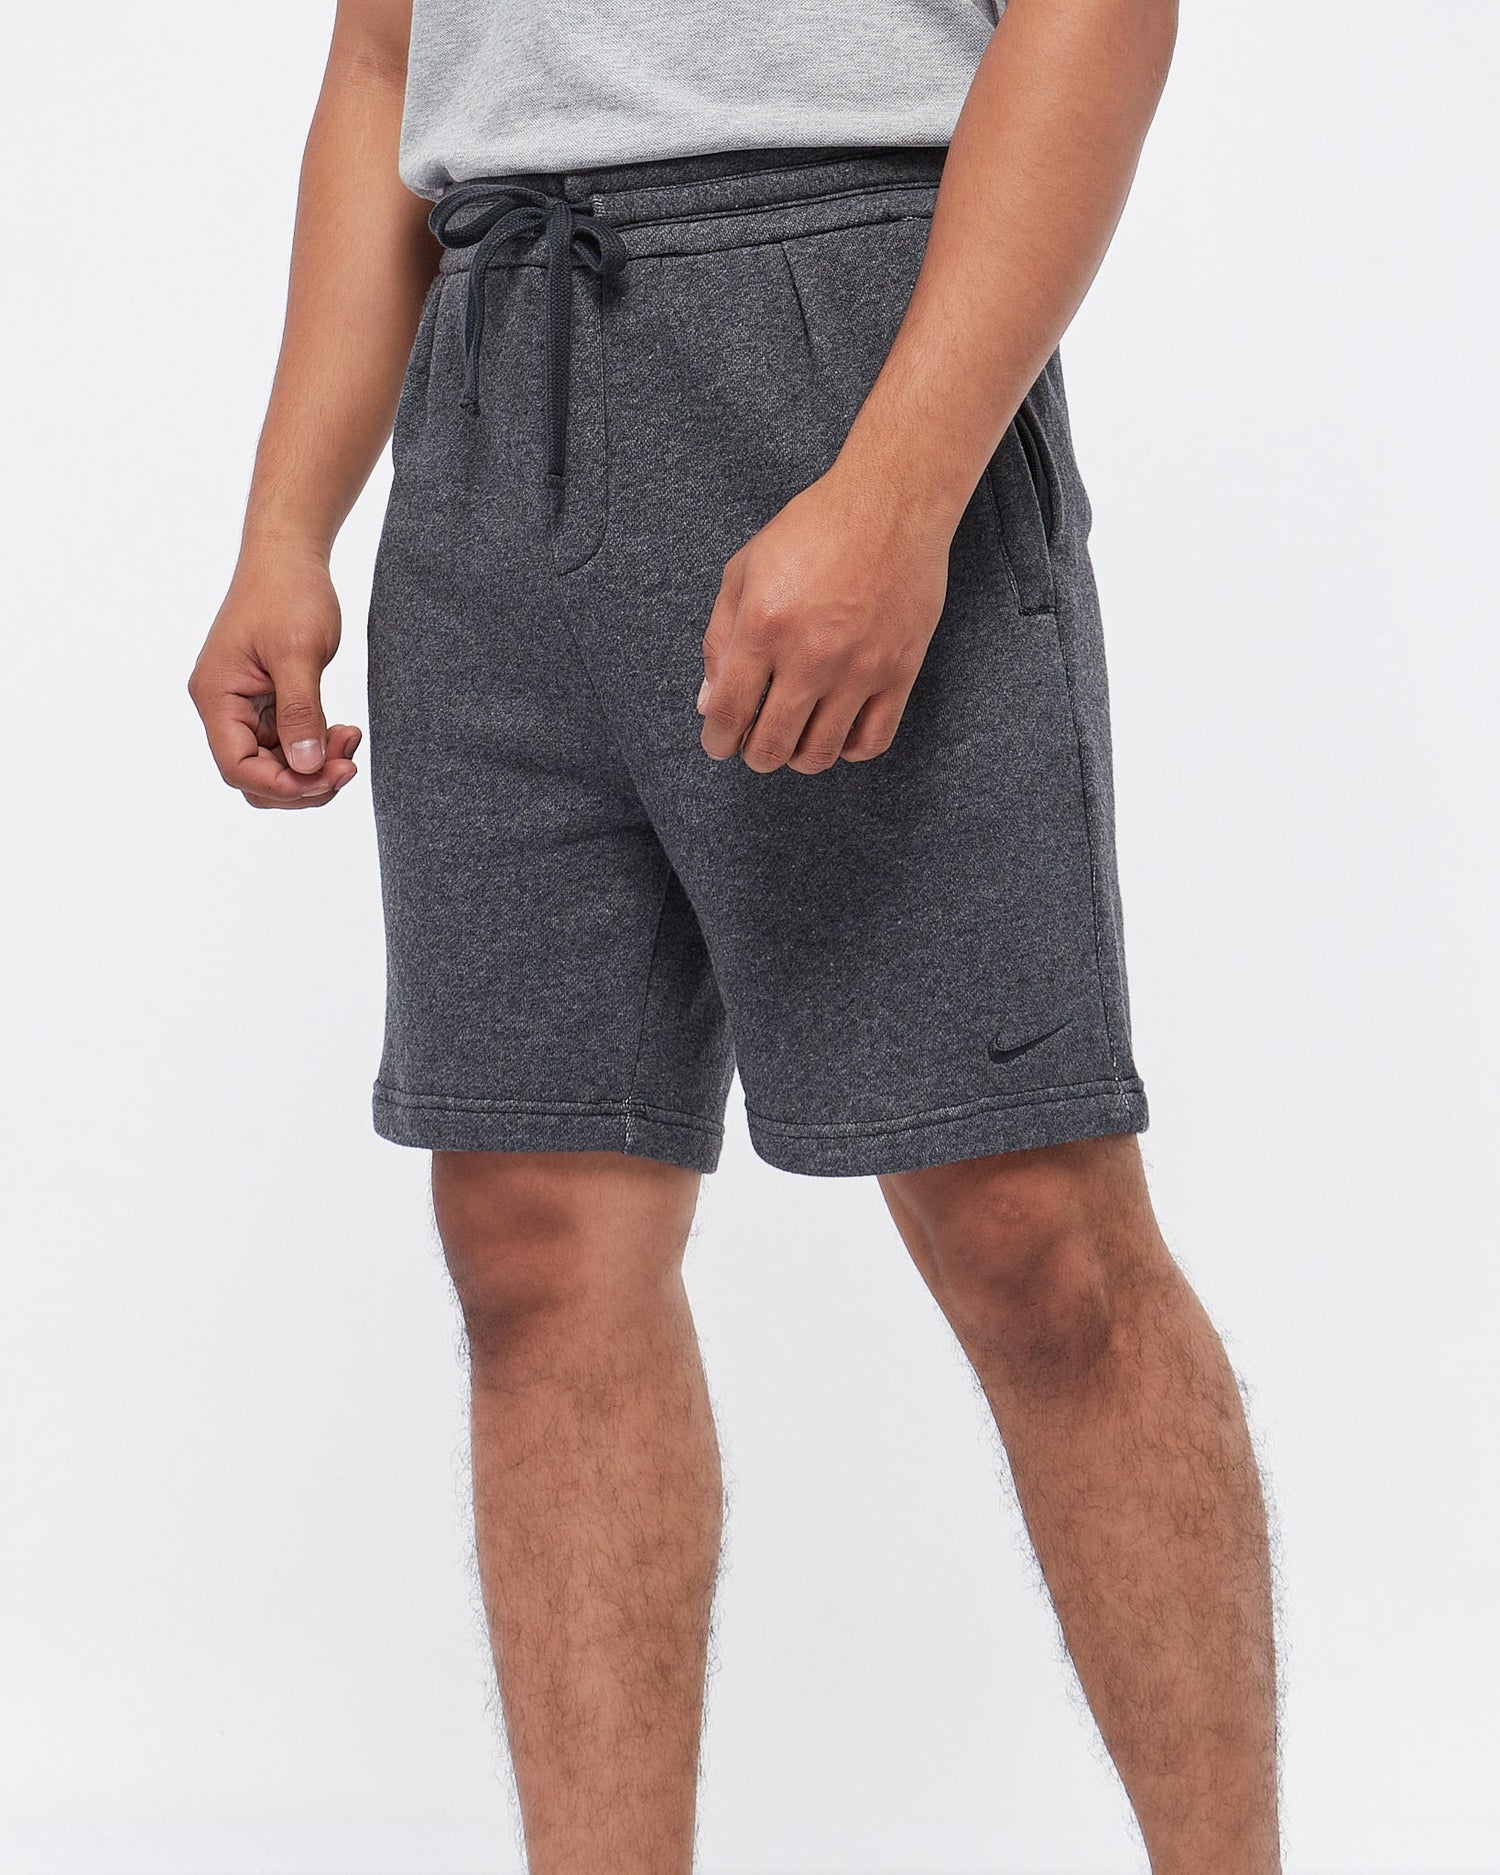 MOI OUTFIT-Swooh Logo Embroidered Men Short 14.50